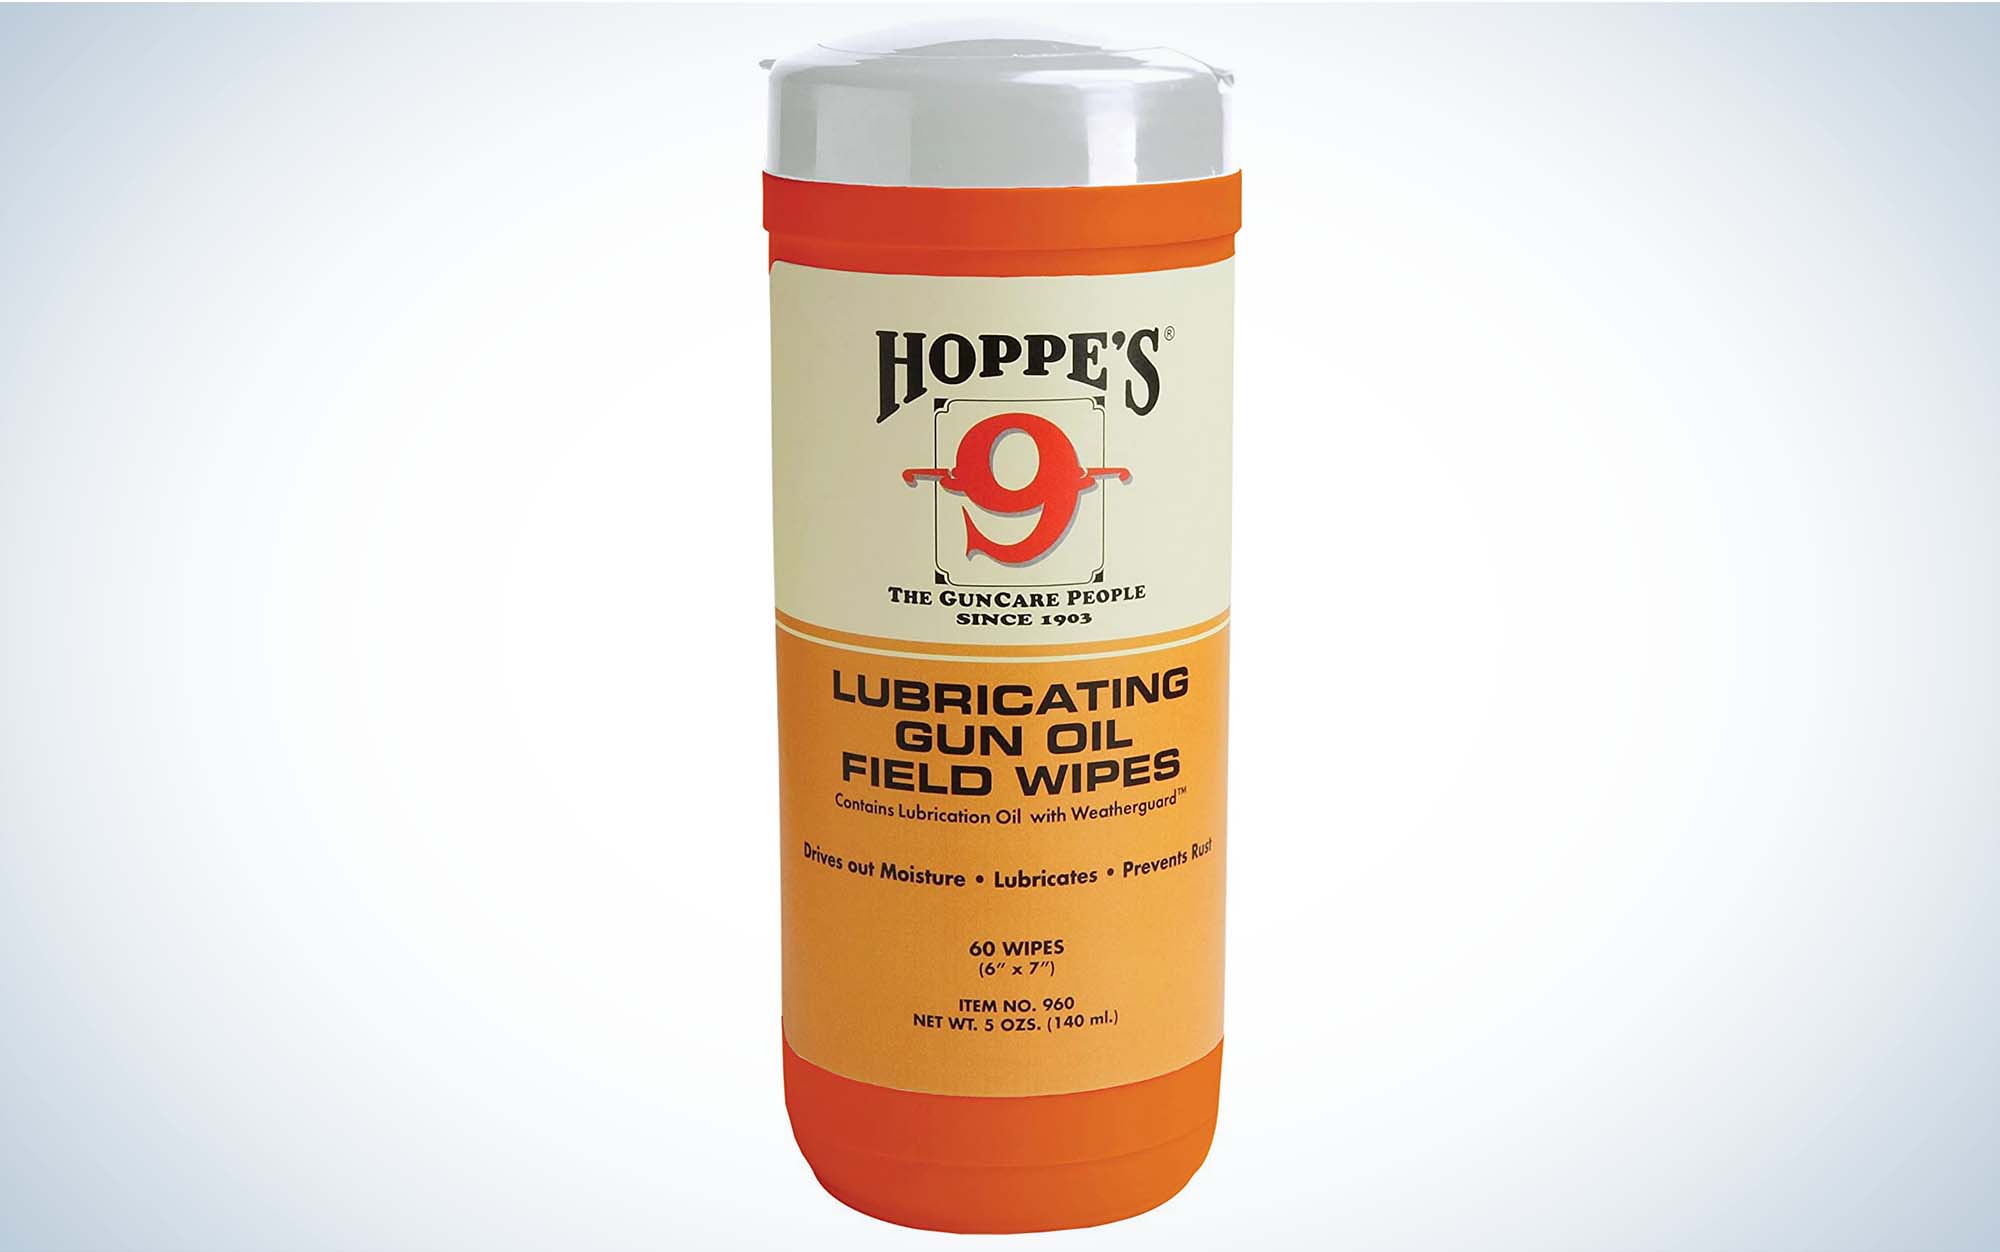 Hoppe's Lubricating Gun Oil Field Wipes are the best wipes.